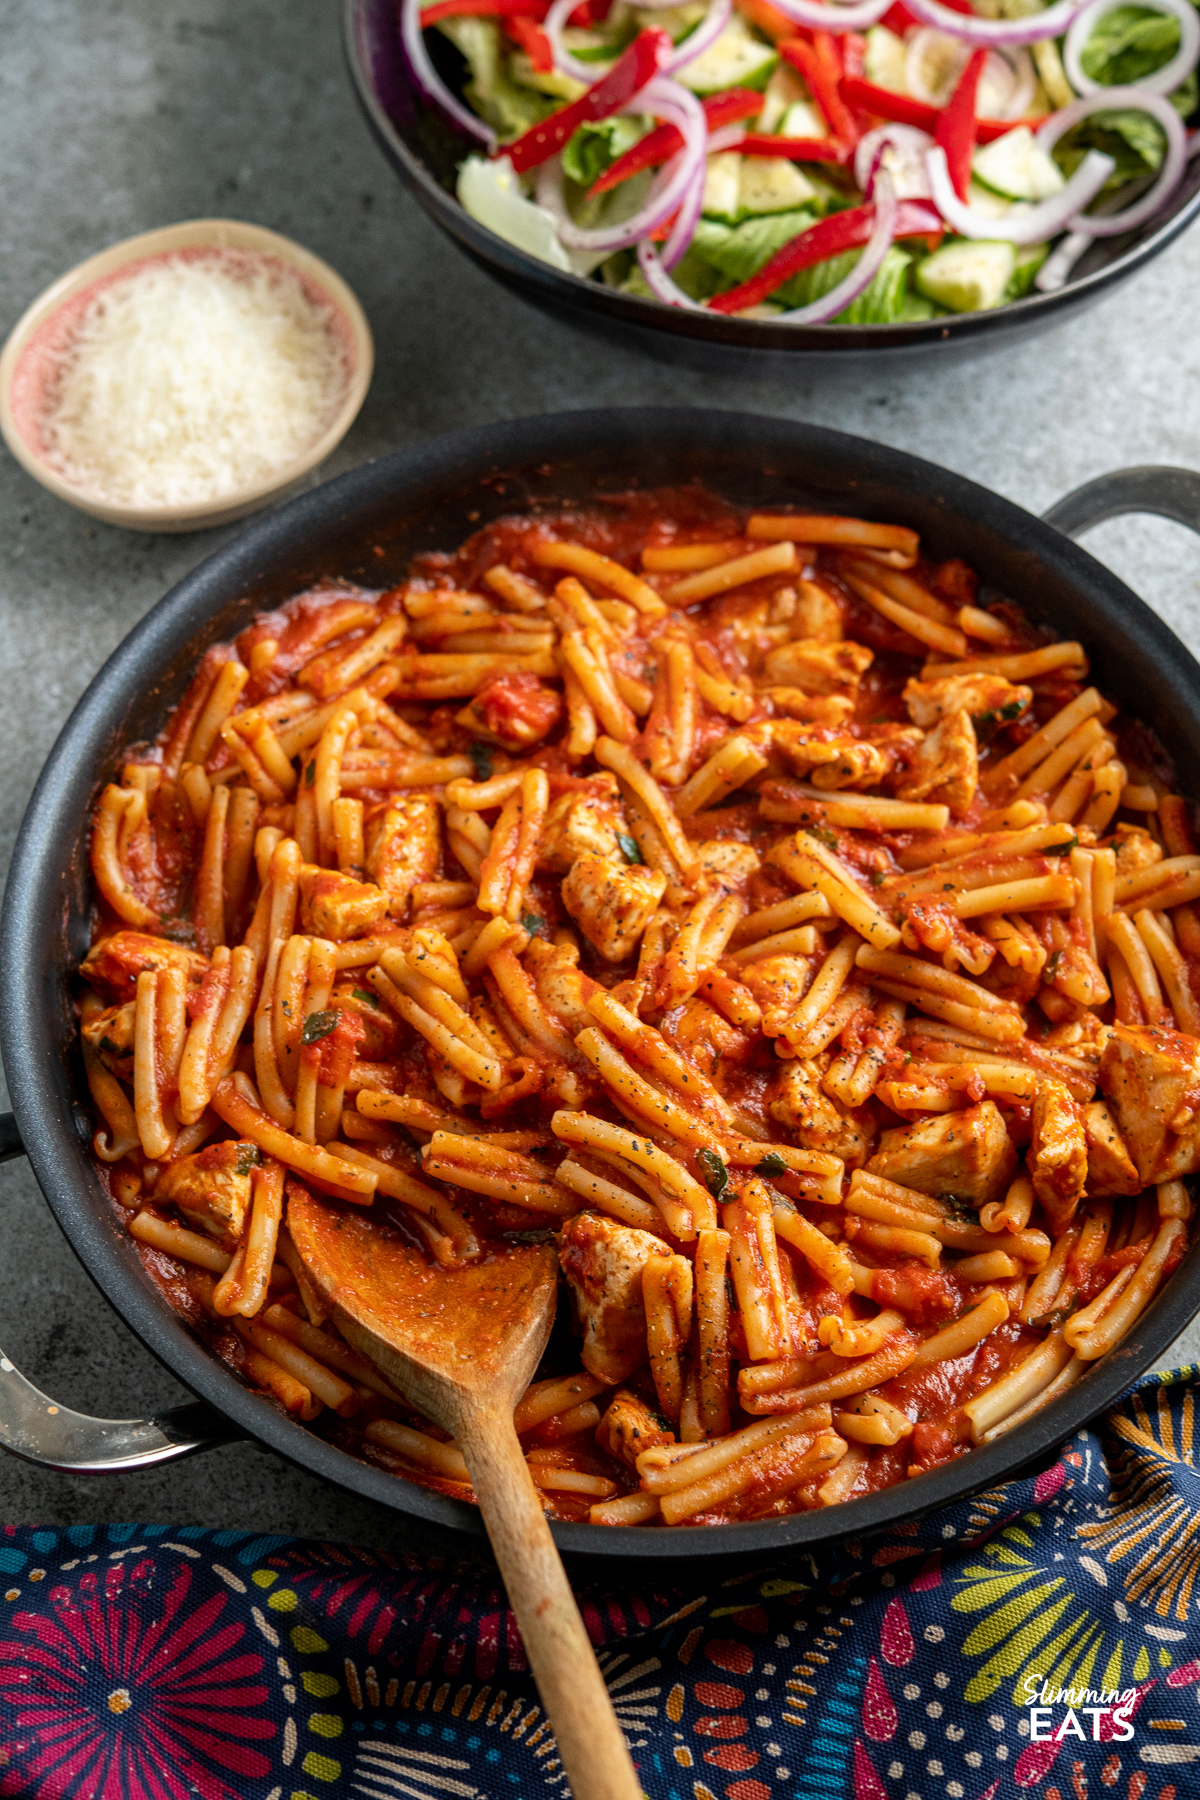 Chicken Arrabbiata Pasta in frying pan with bowl of salad